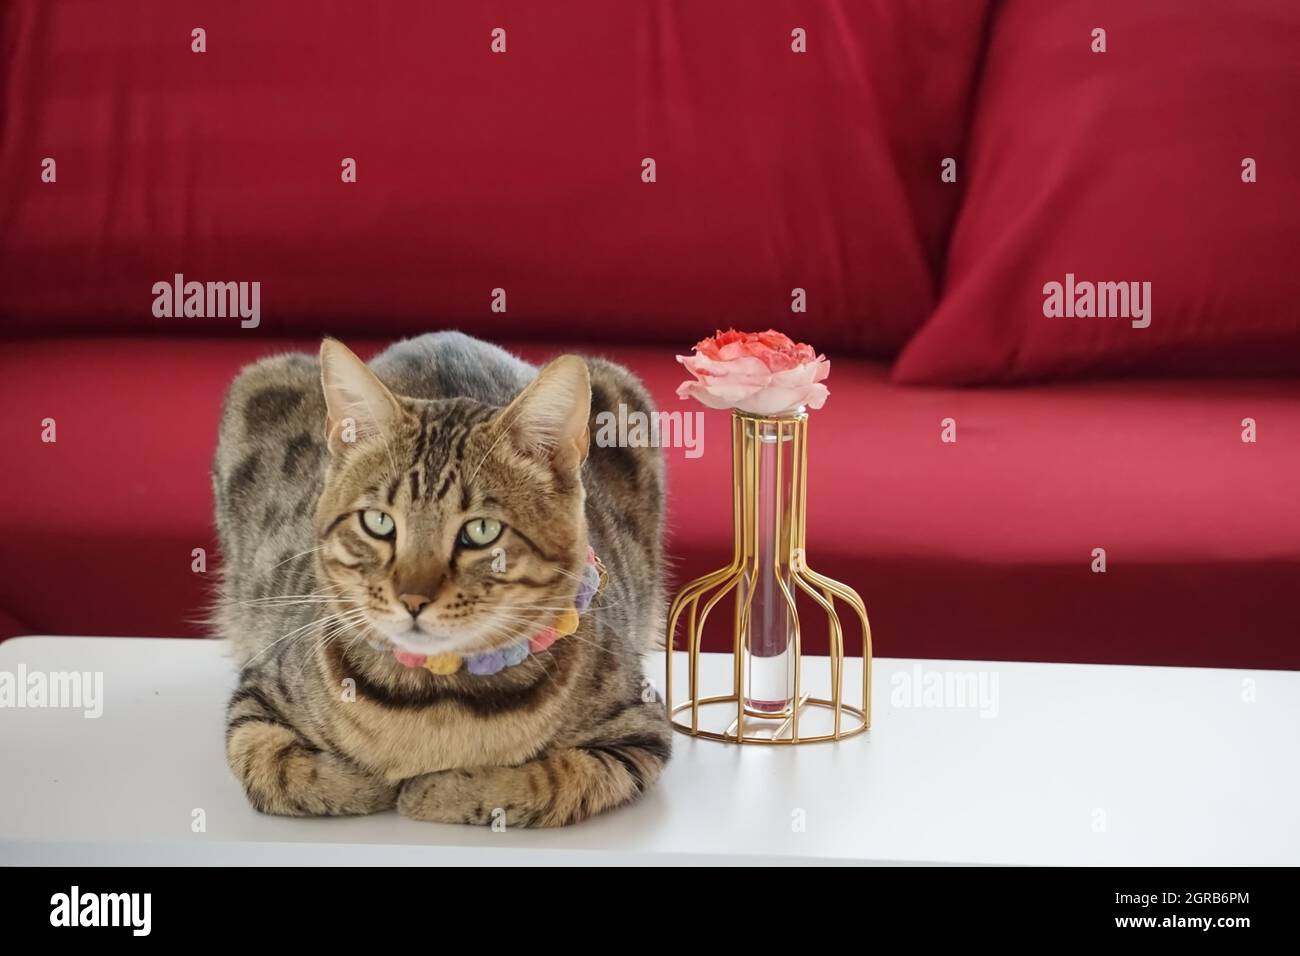 Mixed Breed Cat Sitting Next To Jar Of Rose With Dark Red Sofa As Background Stock Photo